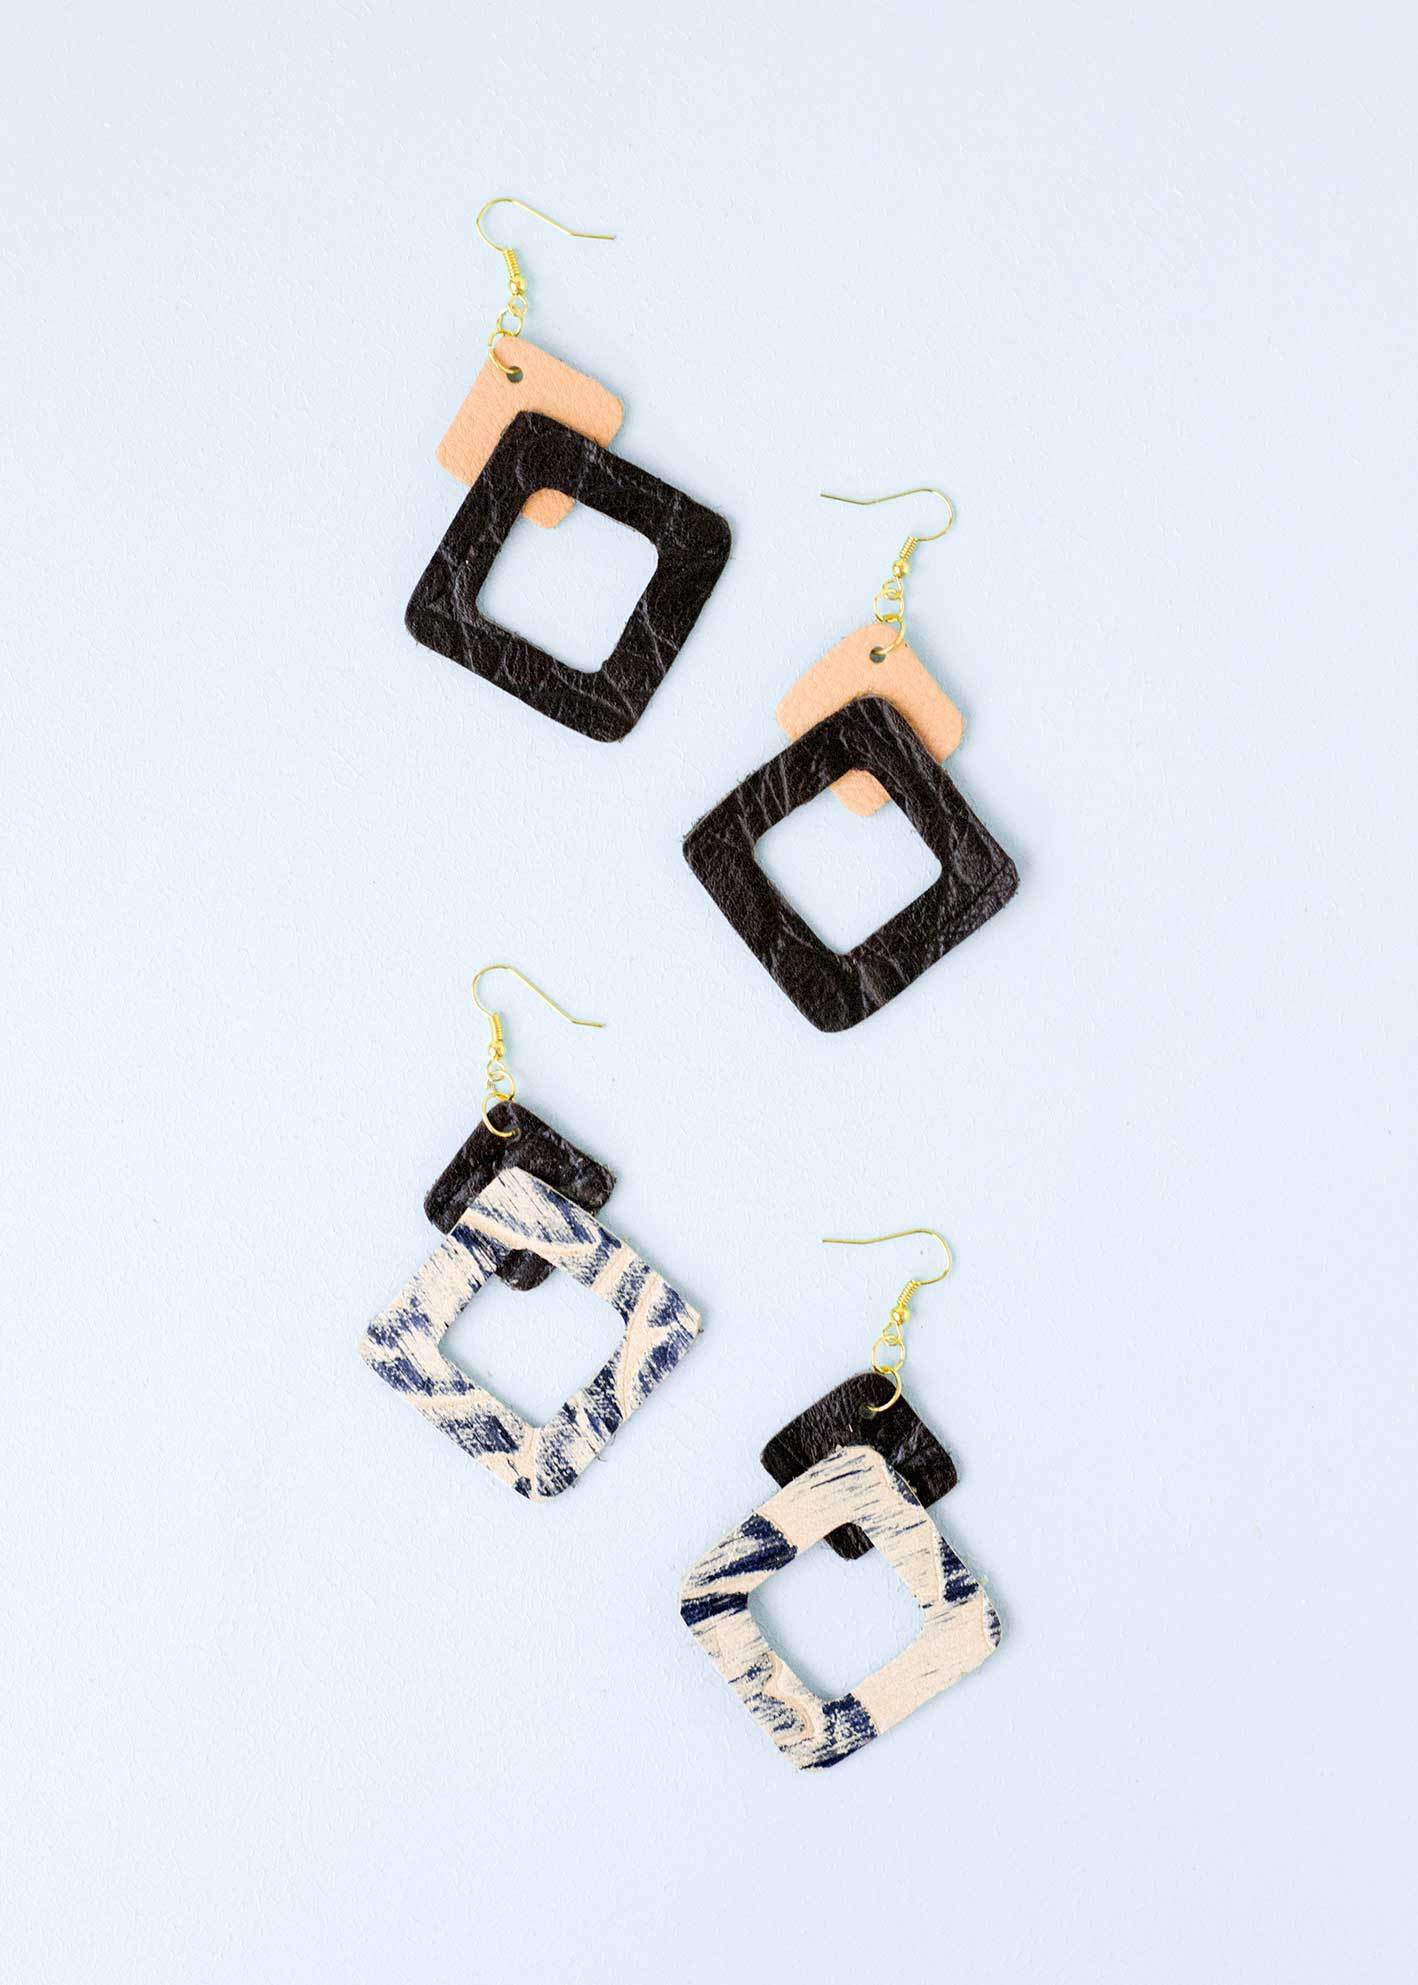 DIY leather earrings - the perfect Christmas gift that won't break the bank